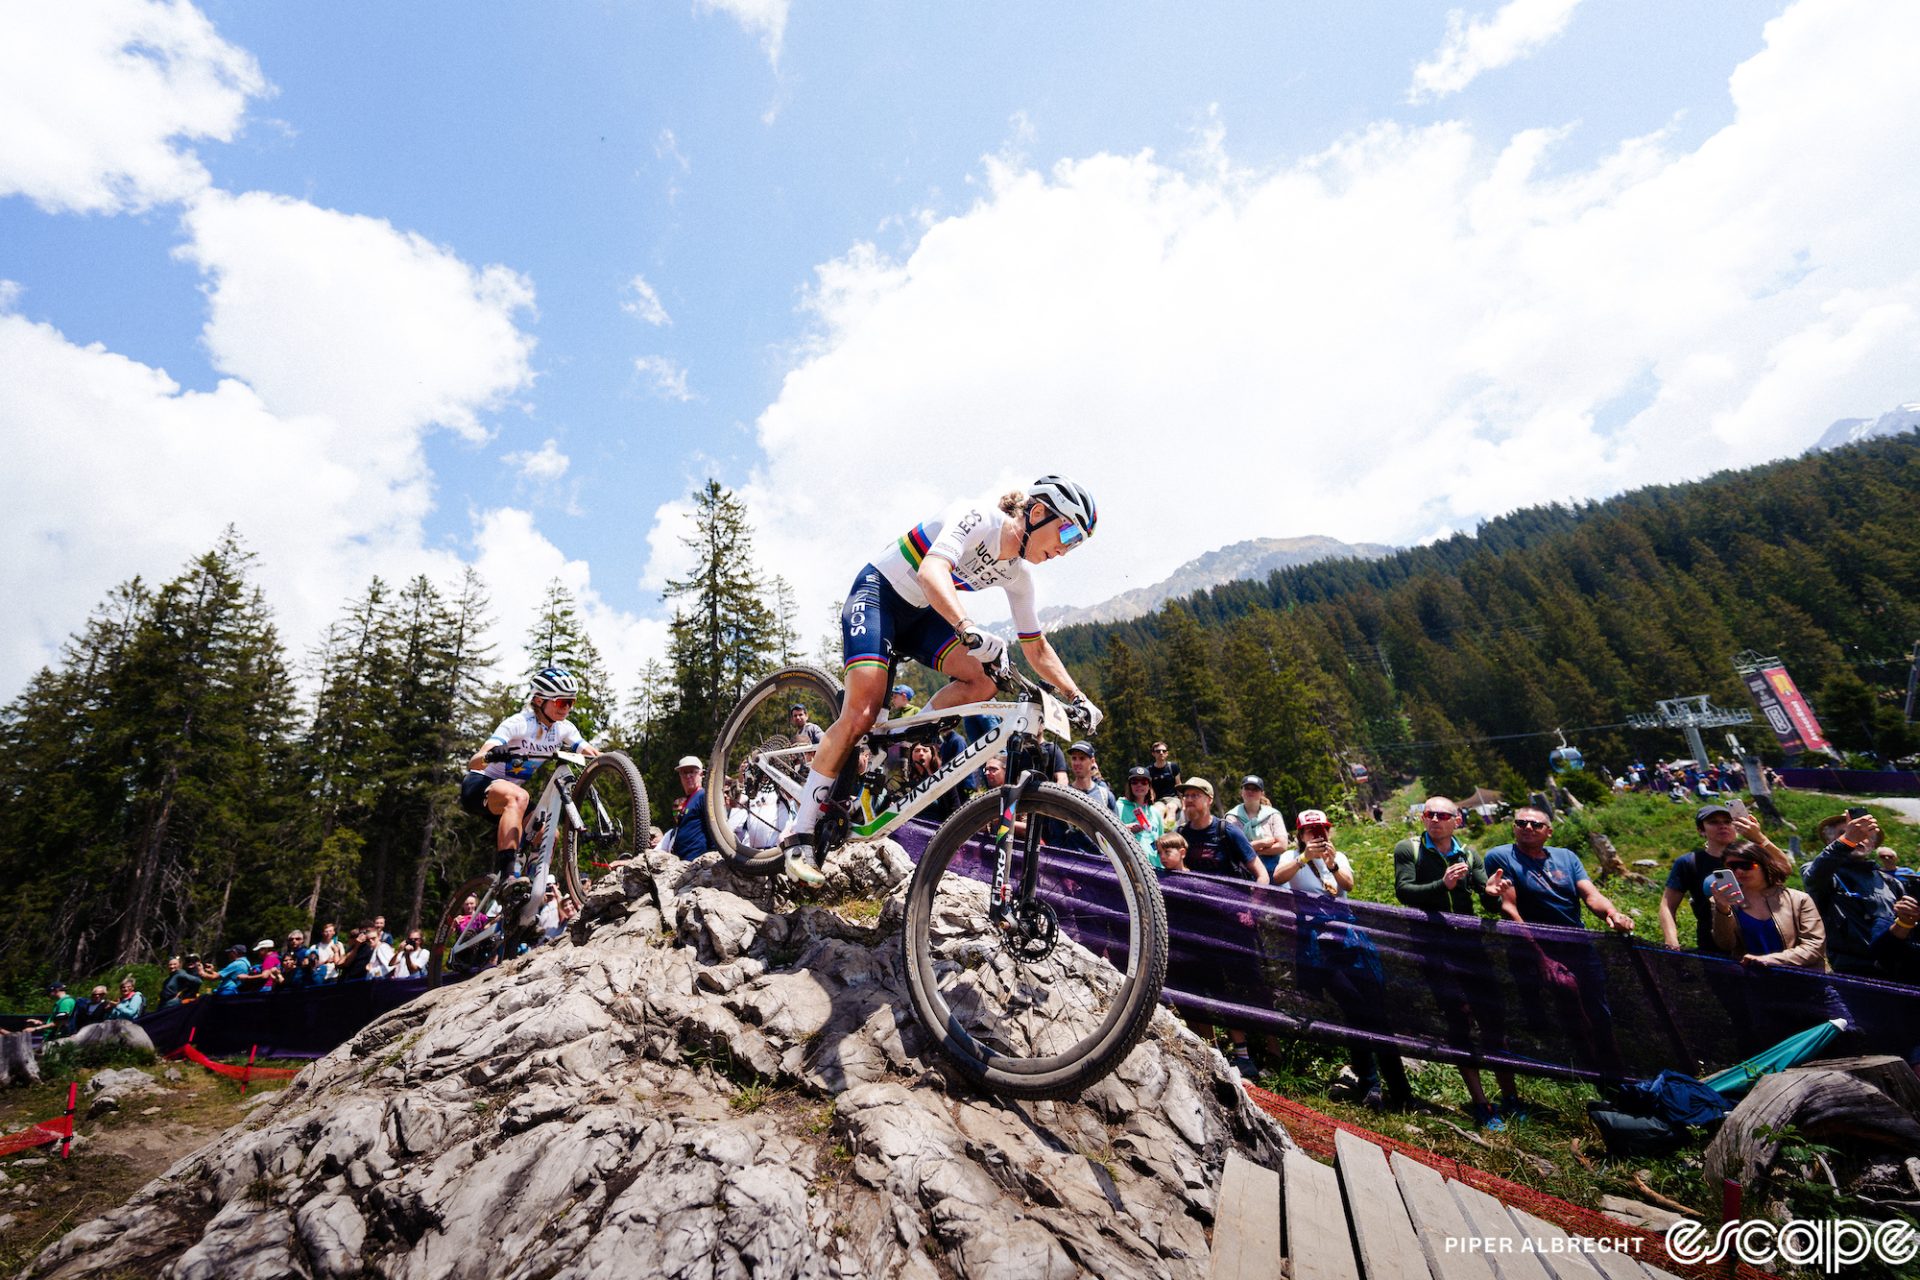 Pauline Ferrand-Prevot rides a rocky section at a World Cup race. She's just cresting the top of the bony outcrop and about to descend onto a wooden bridge. She's wearing the rainbow jersey of World Champion.